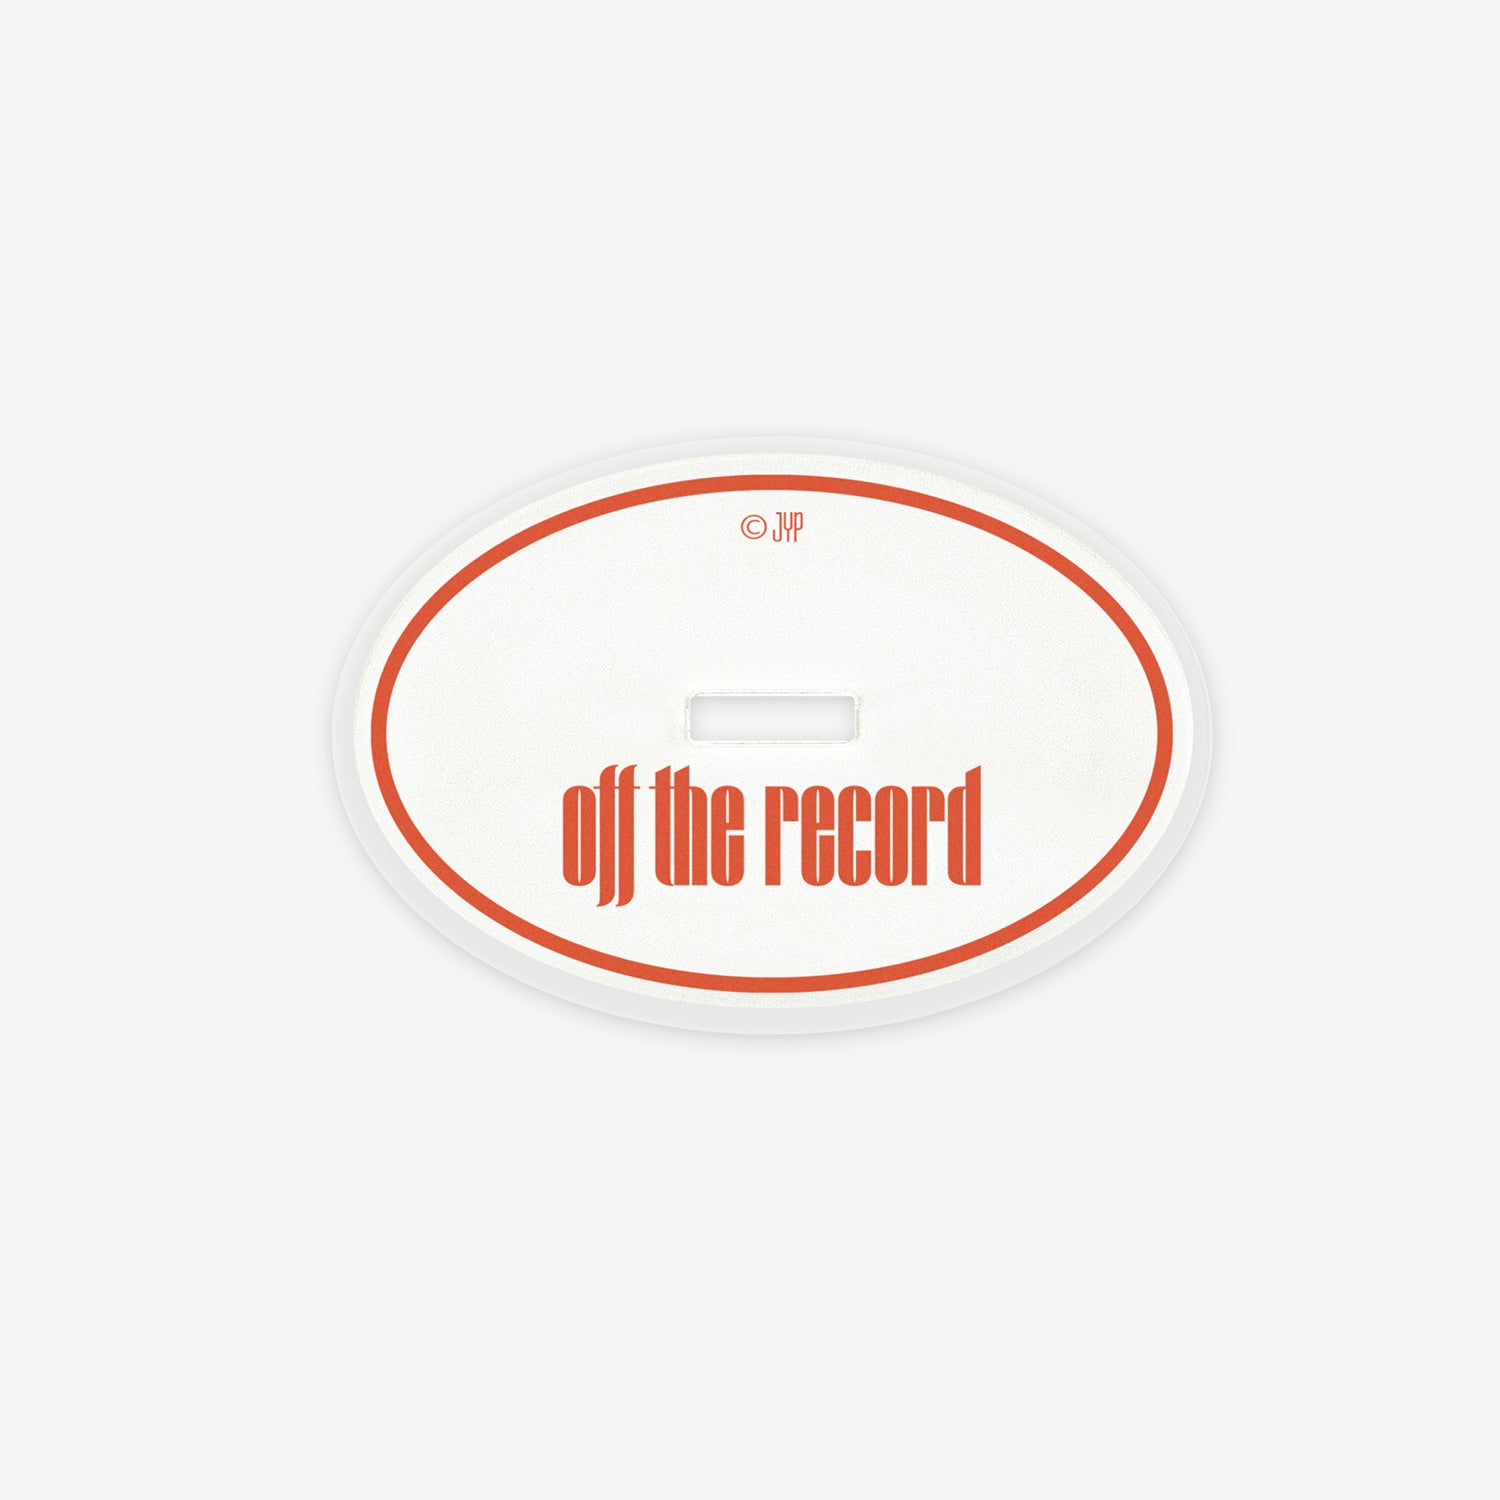 ACRYLIC STAND【B】 / WOOYOUNG (From 2PM)『Off the record』